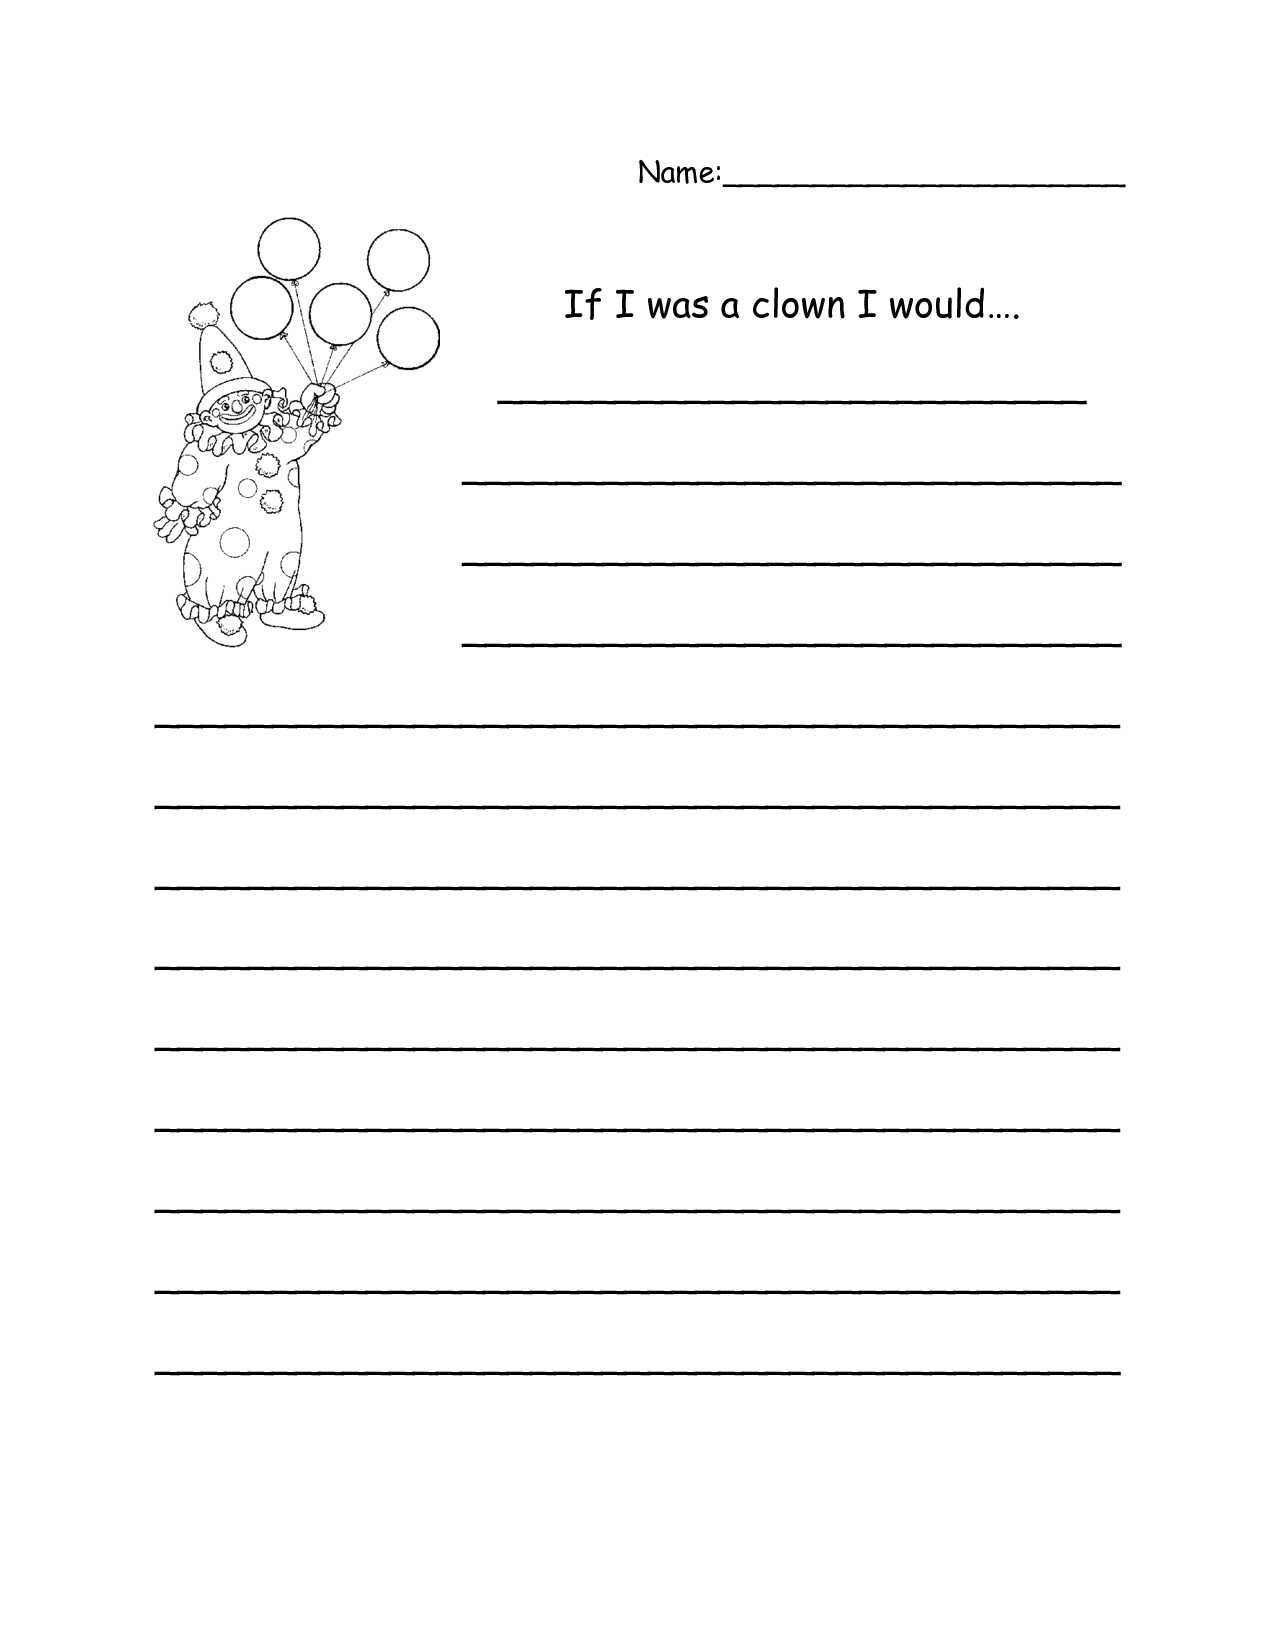 5th Grade Writing Skills Worksheets together with Creative Writing Prompts Third Grade Paper Service